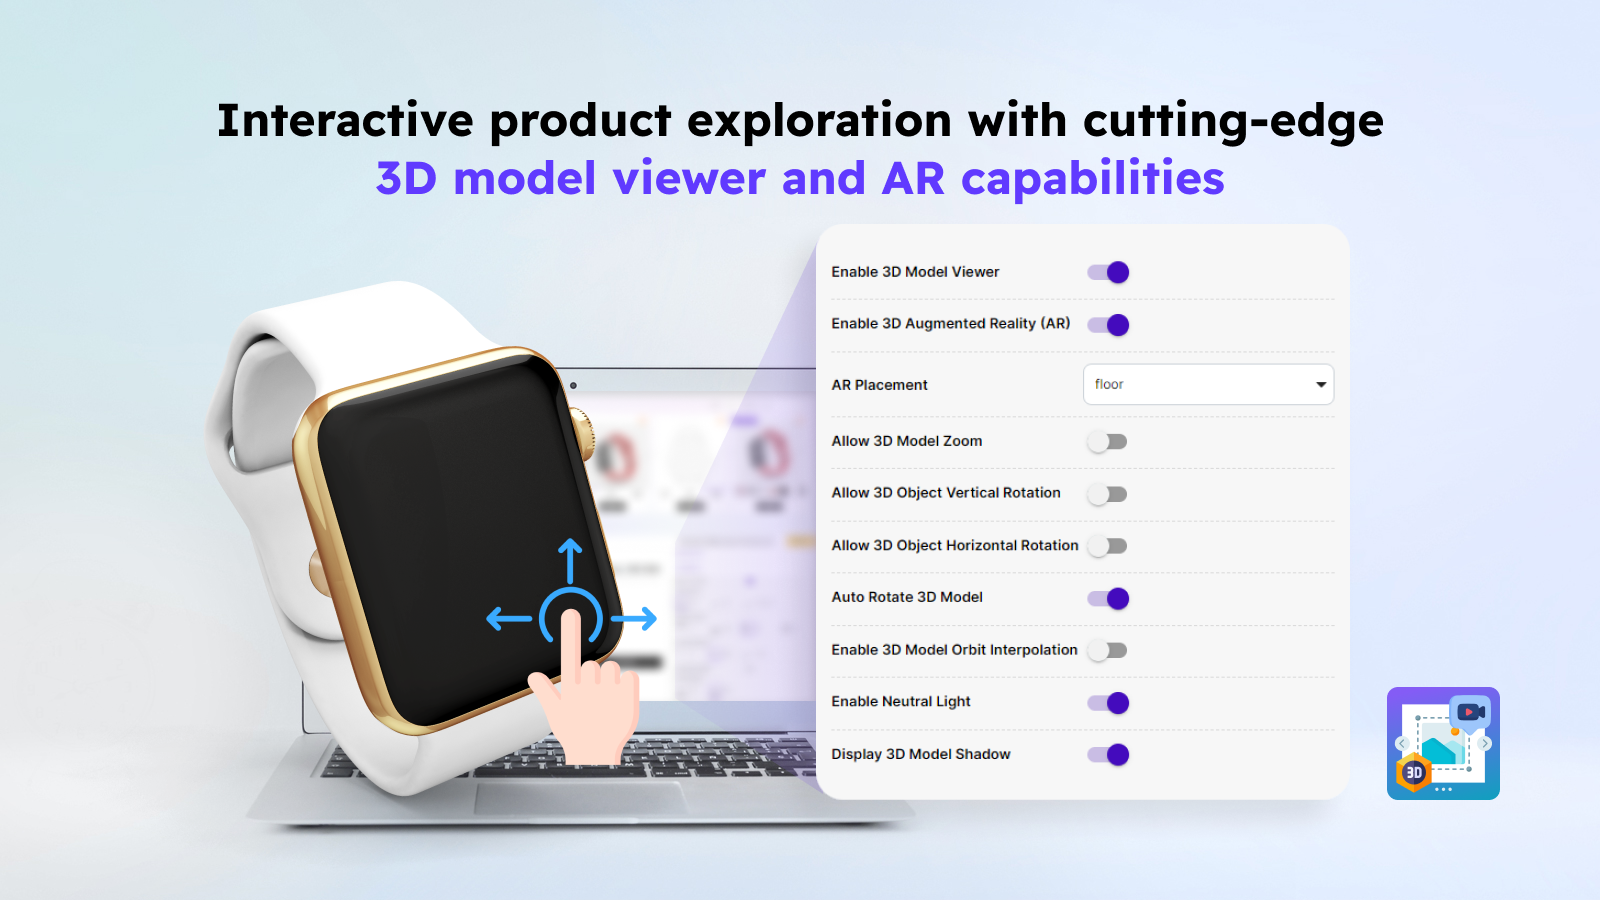 3D Model Viewer and Augmented Reality (AR) functionality